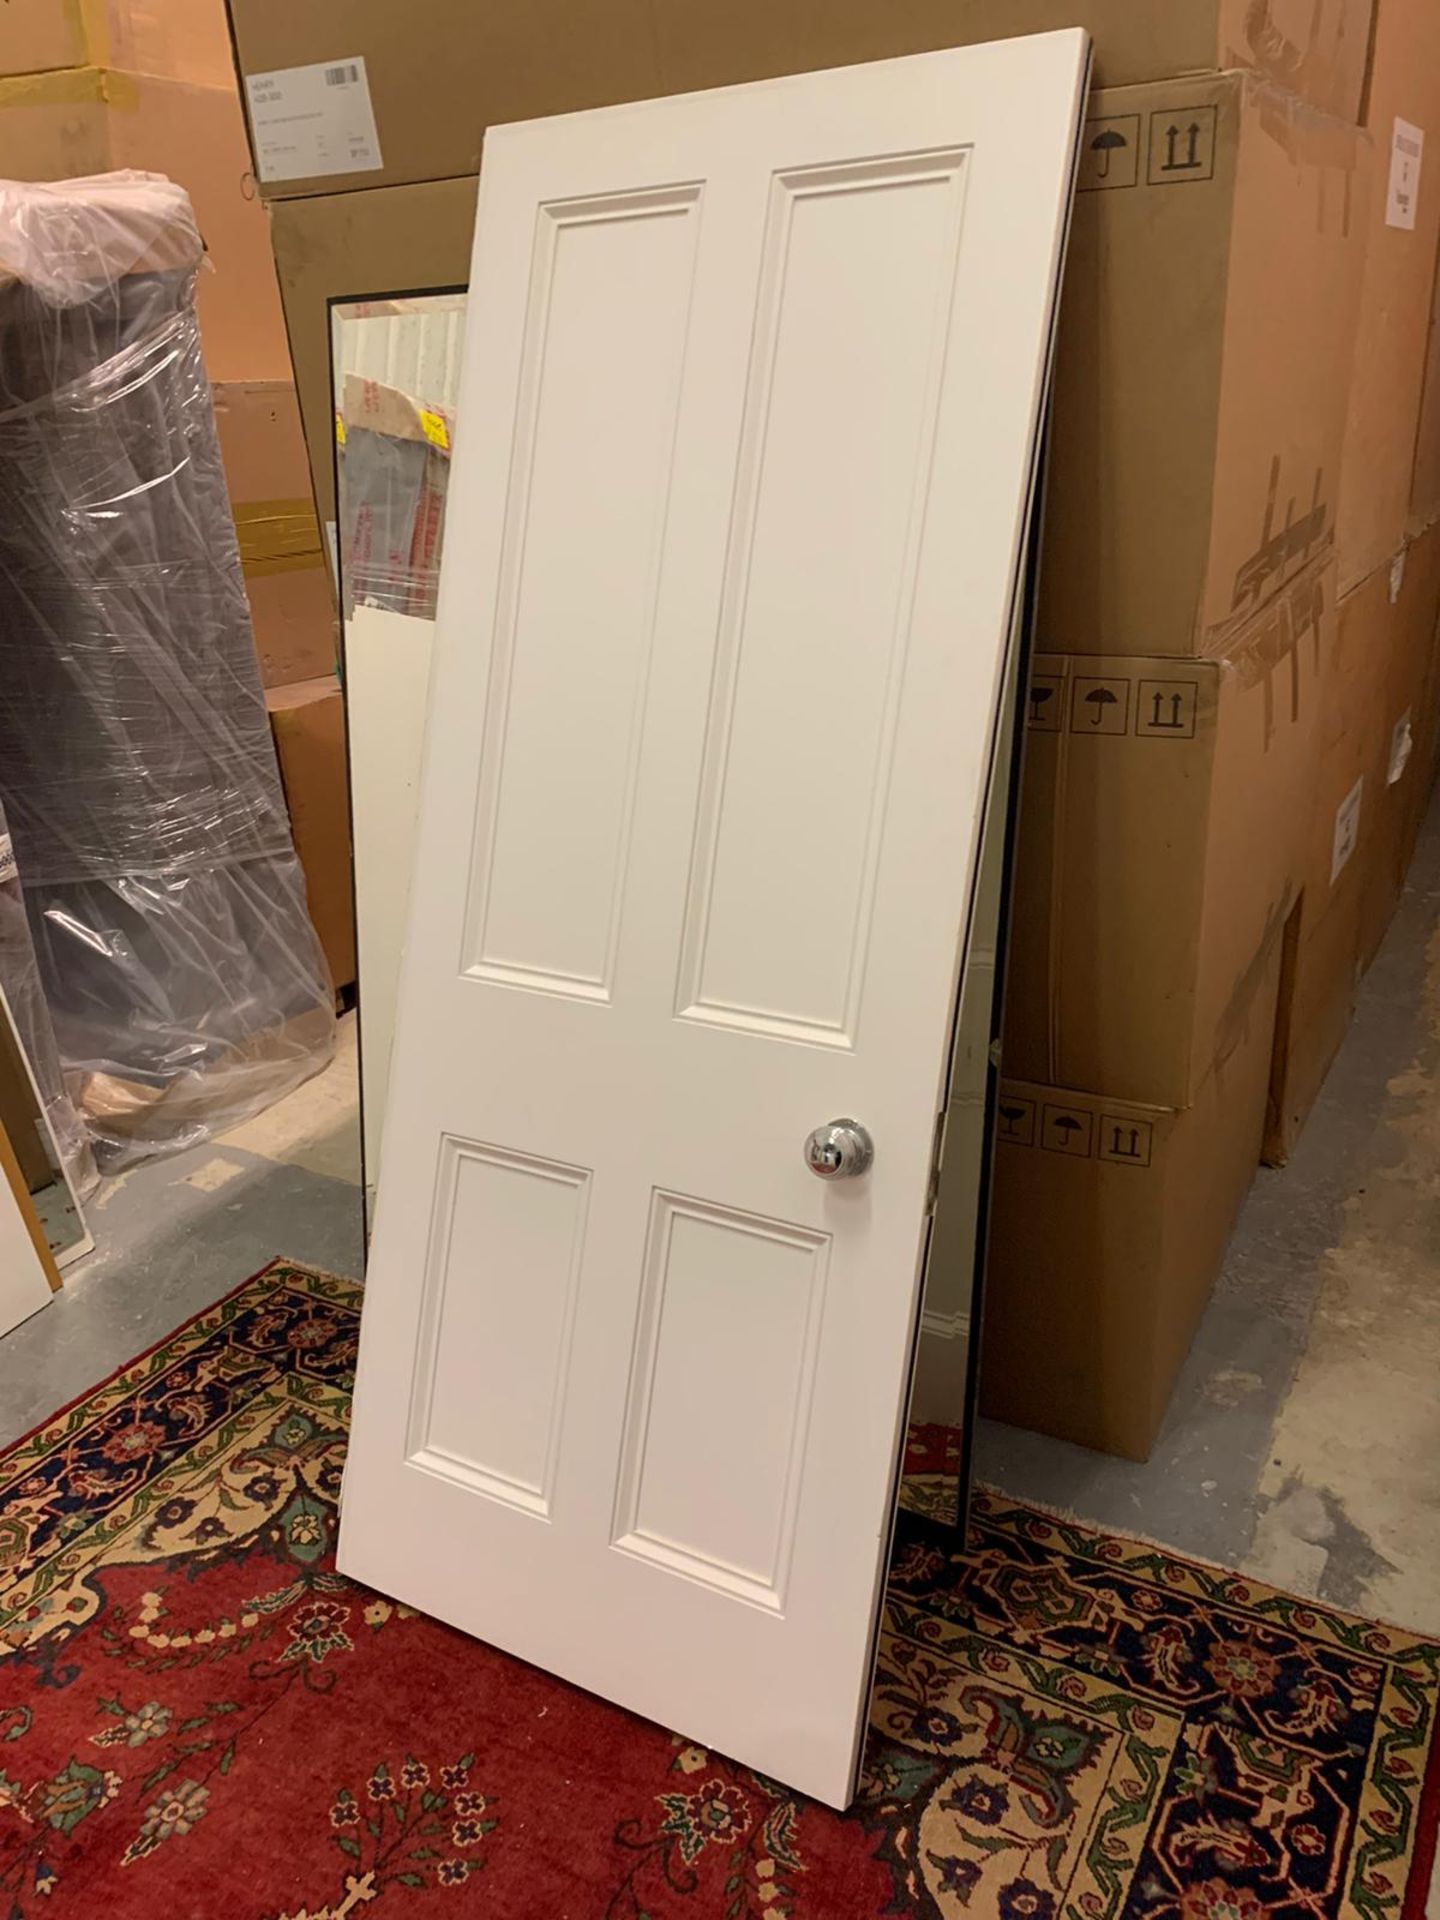 White Panelled Fire Door With Surround And Frame 83cm X 206cm X 5cm Consigned From A Luxury - Image 2 of 3